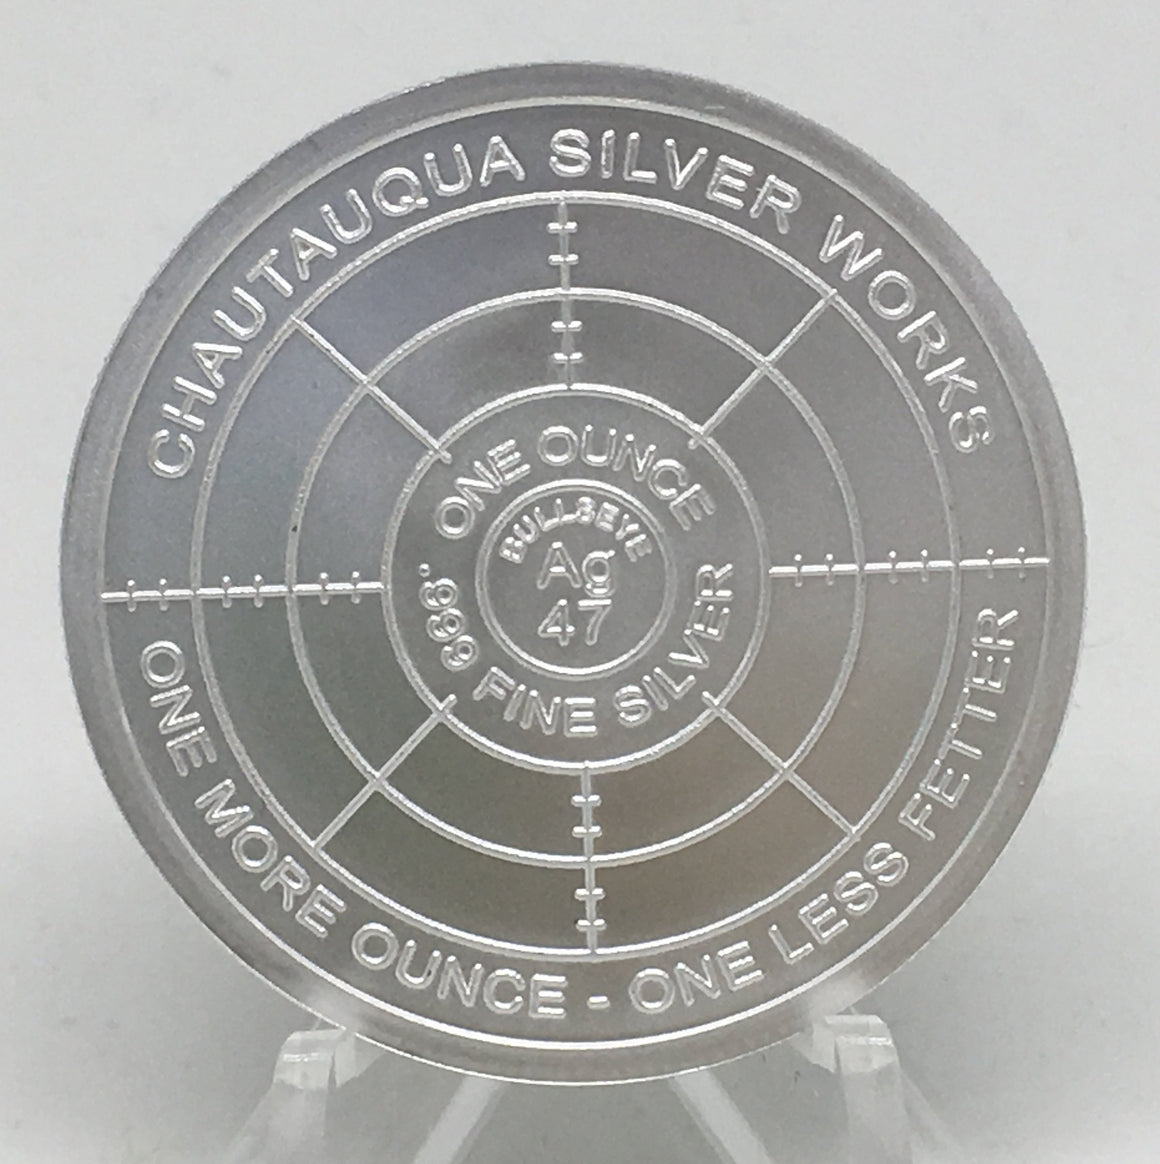 Toxic Series Too #3 Deathbed Confession, BU Finish by Chautauqua Silver Works, 1oz .999 Silver Round.